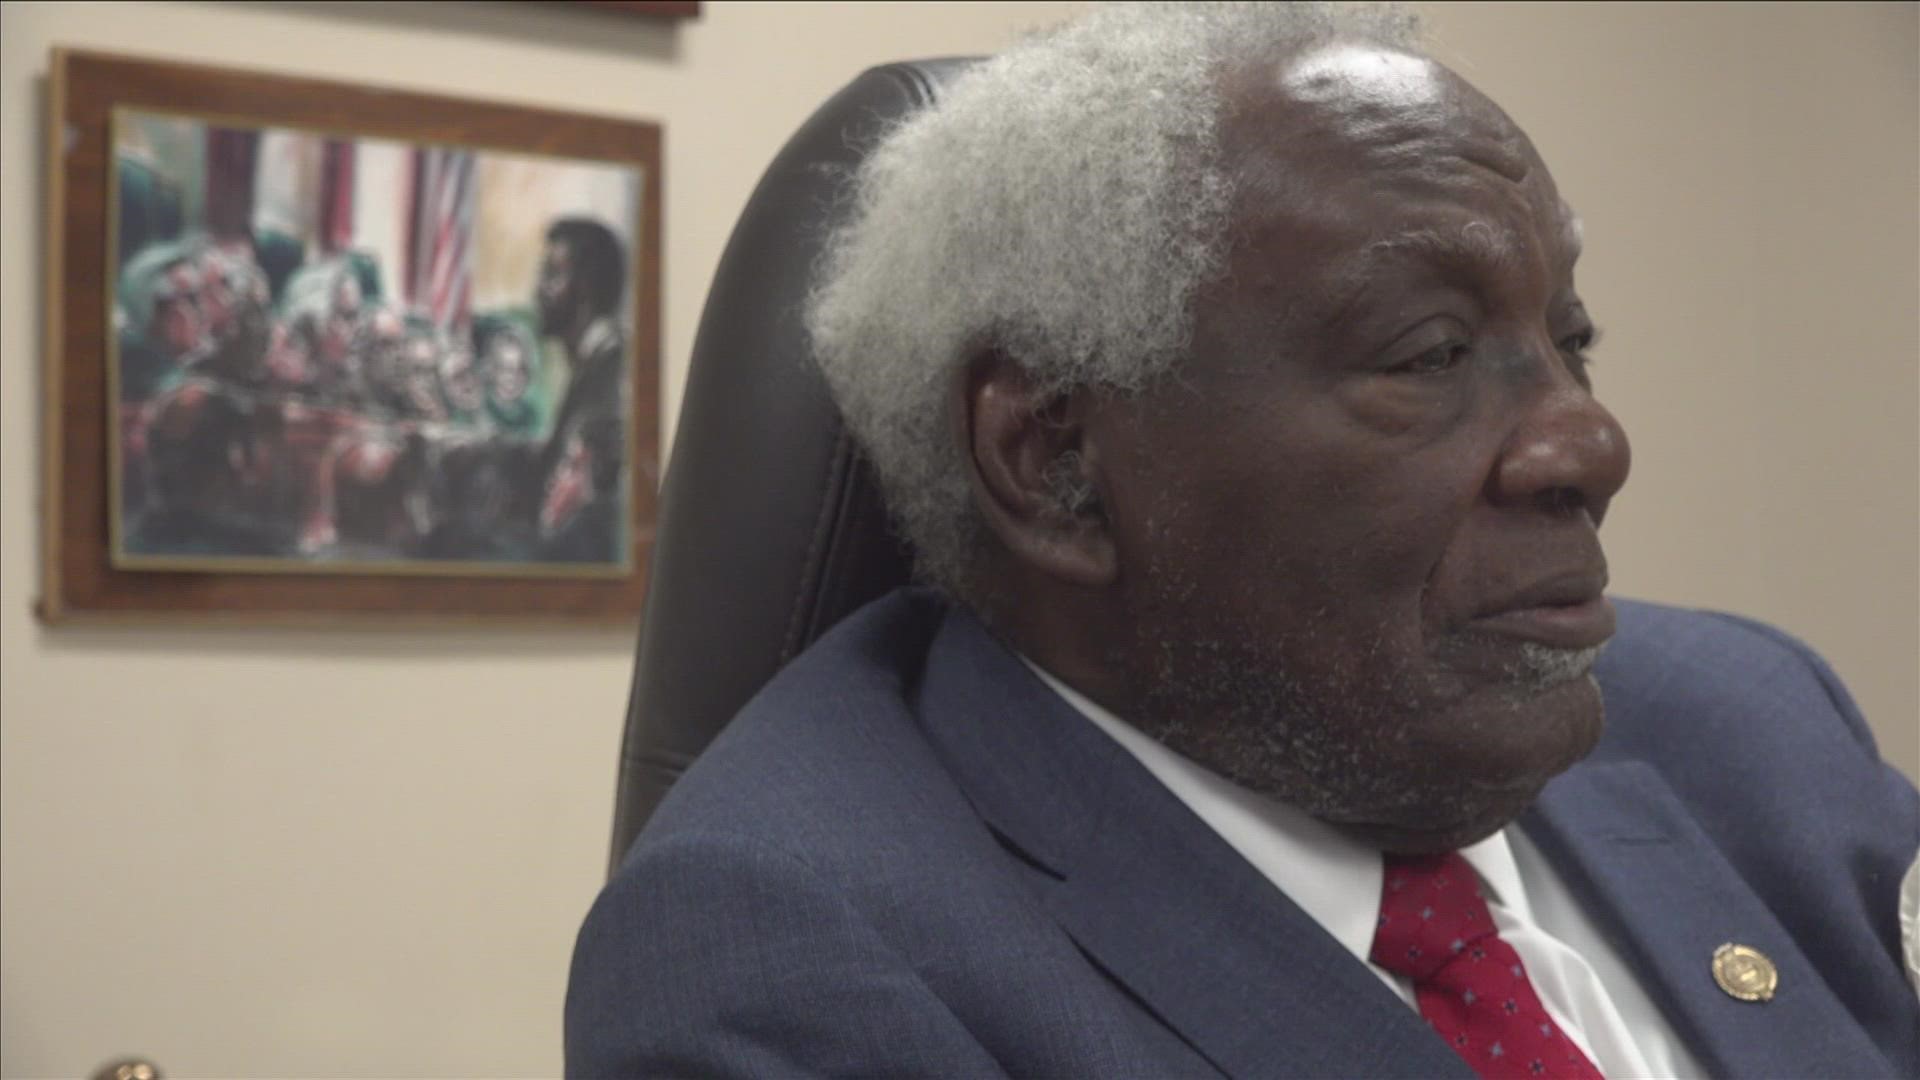 Attorney Walter Bailey represented MLK during the 1968 sanitation workers' strike in Memphis. Decades later, he reflects on the death of Tyre Nichols.